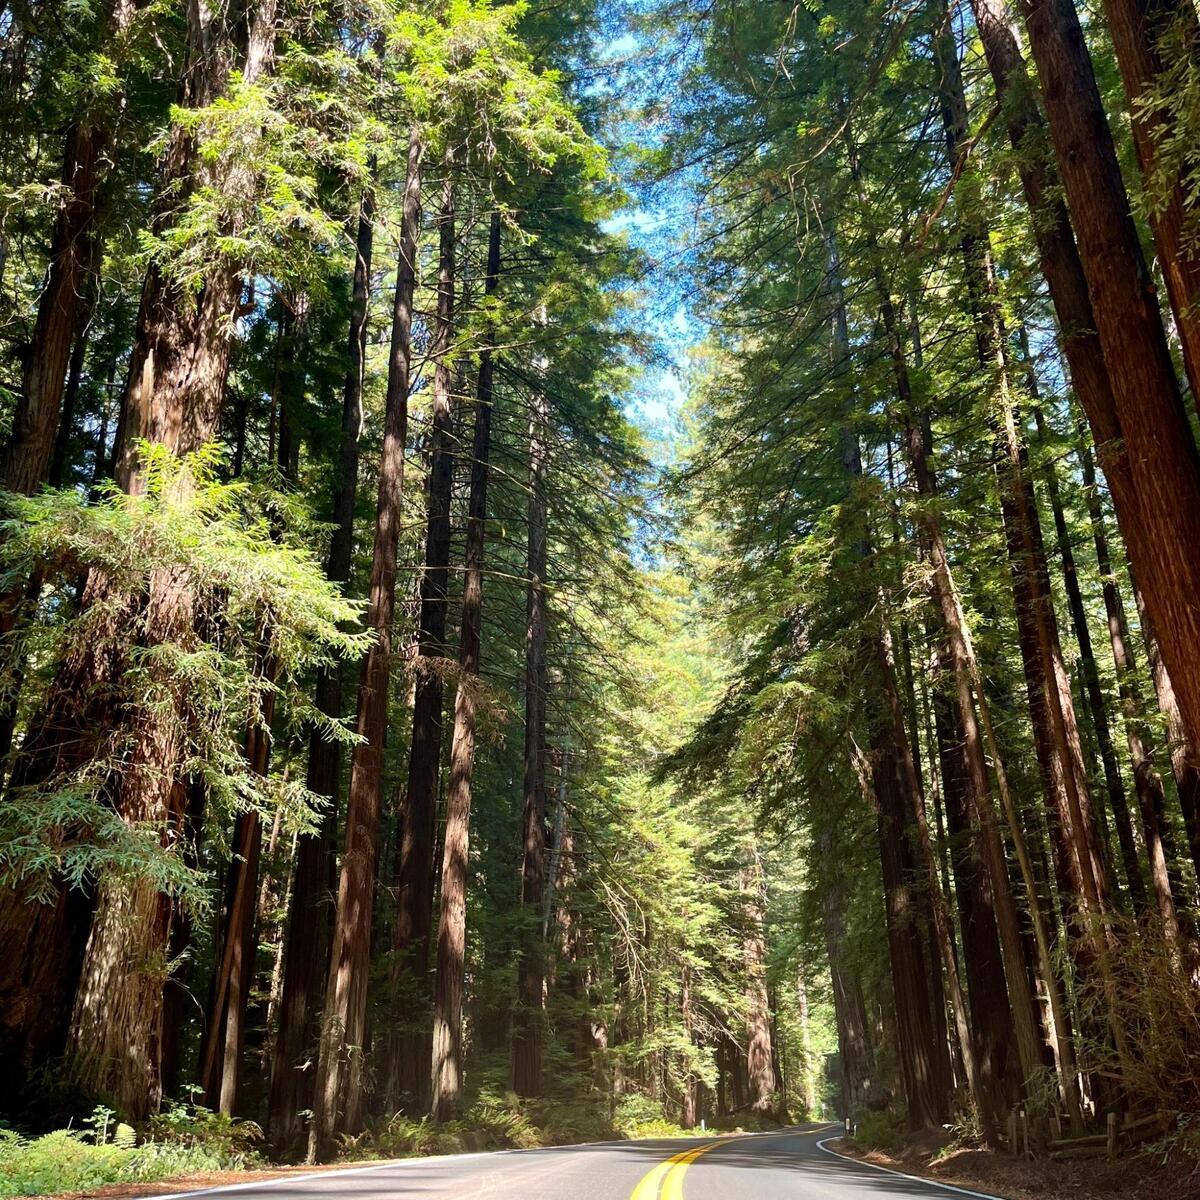 A paved road surrounded by a redwood forest